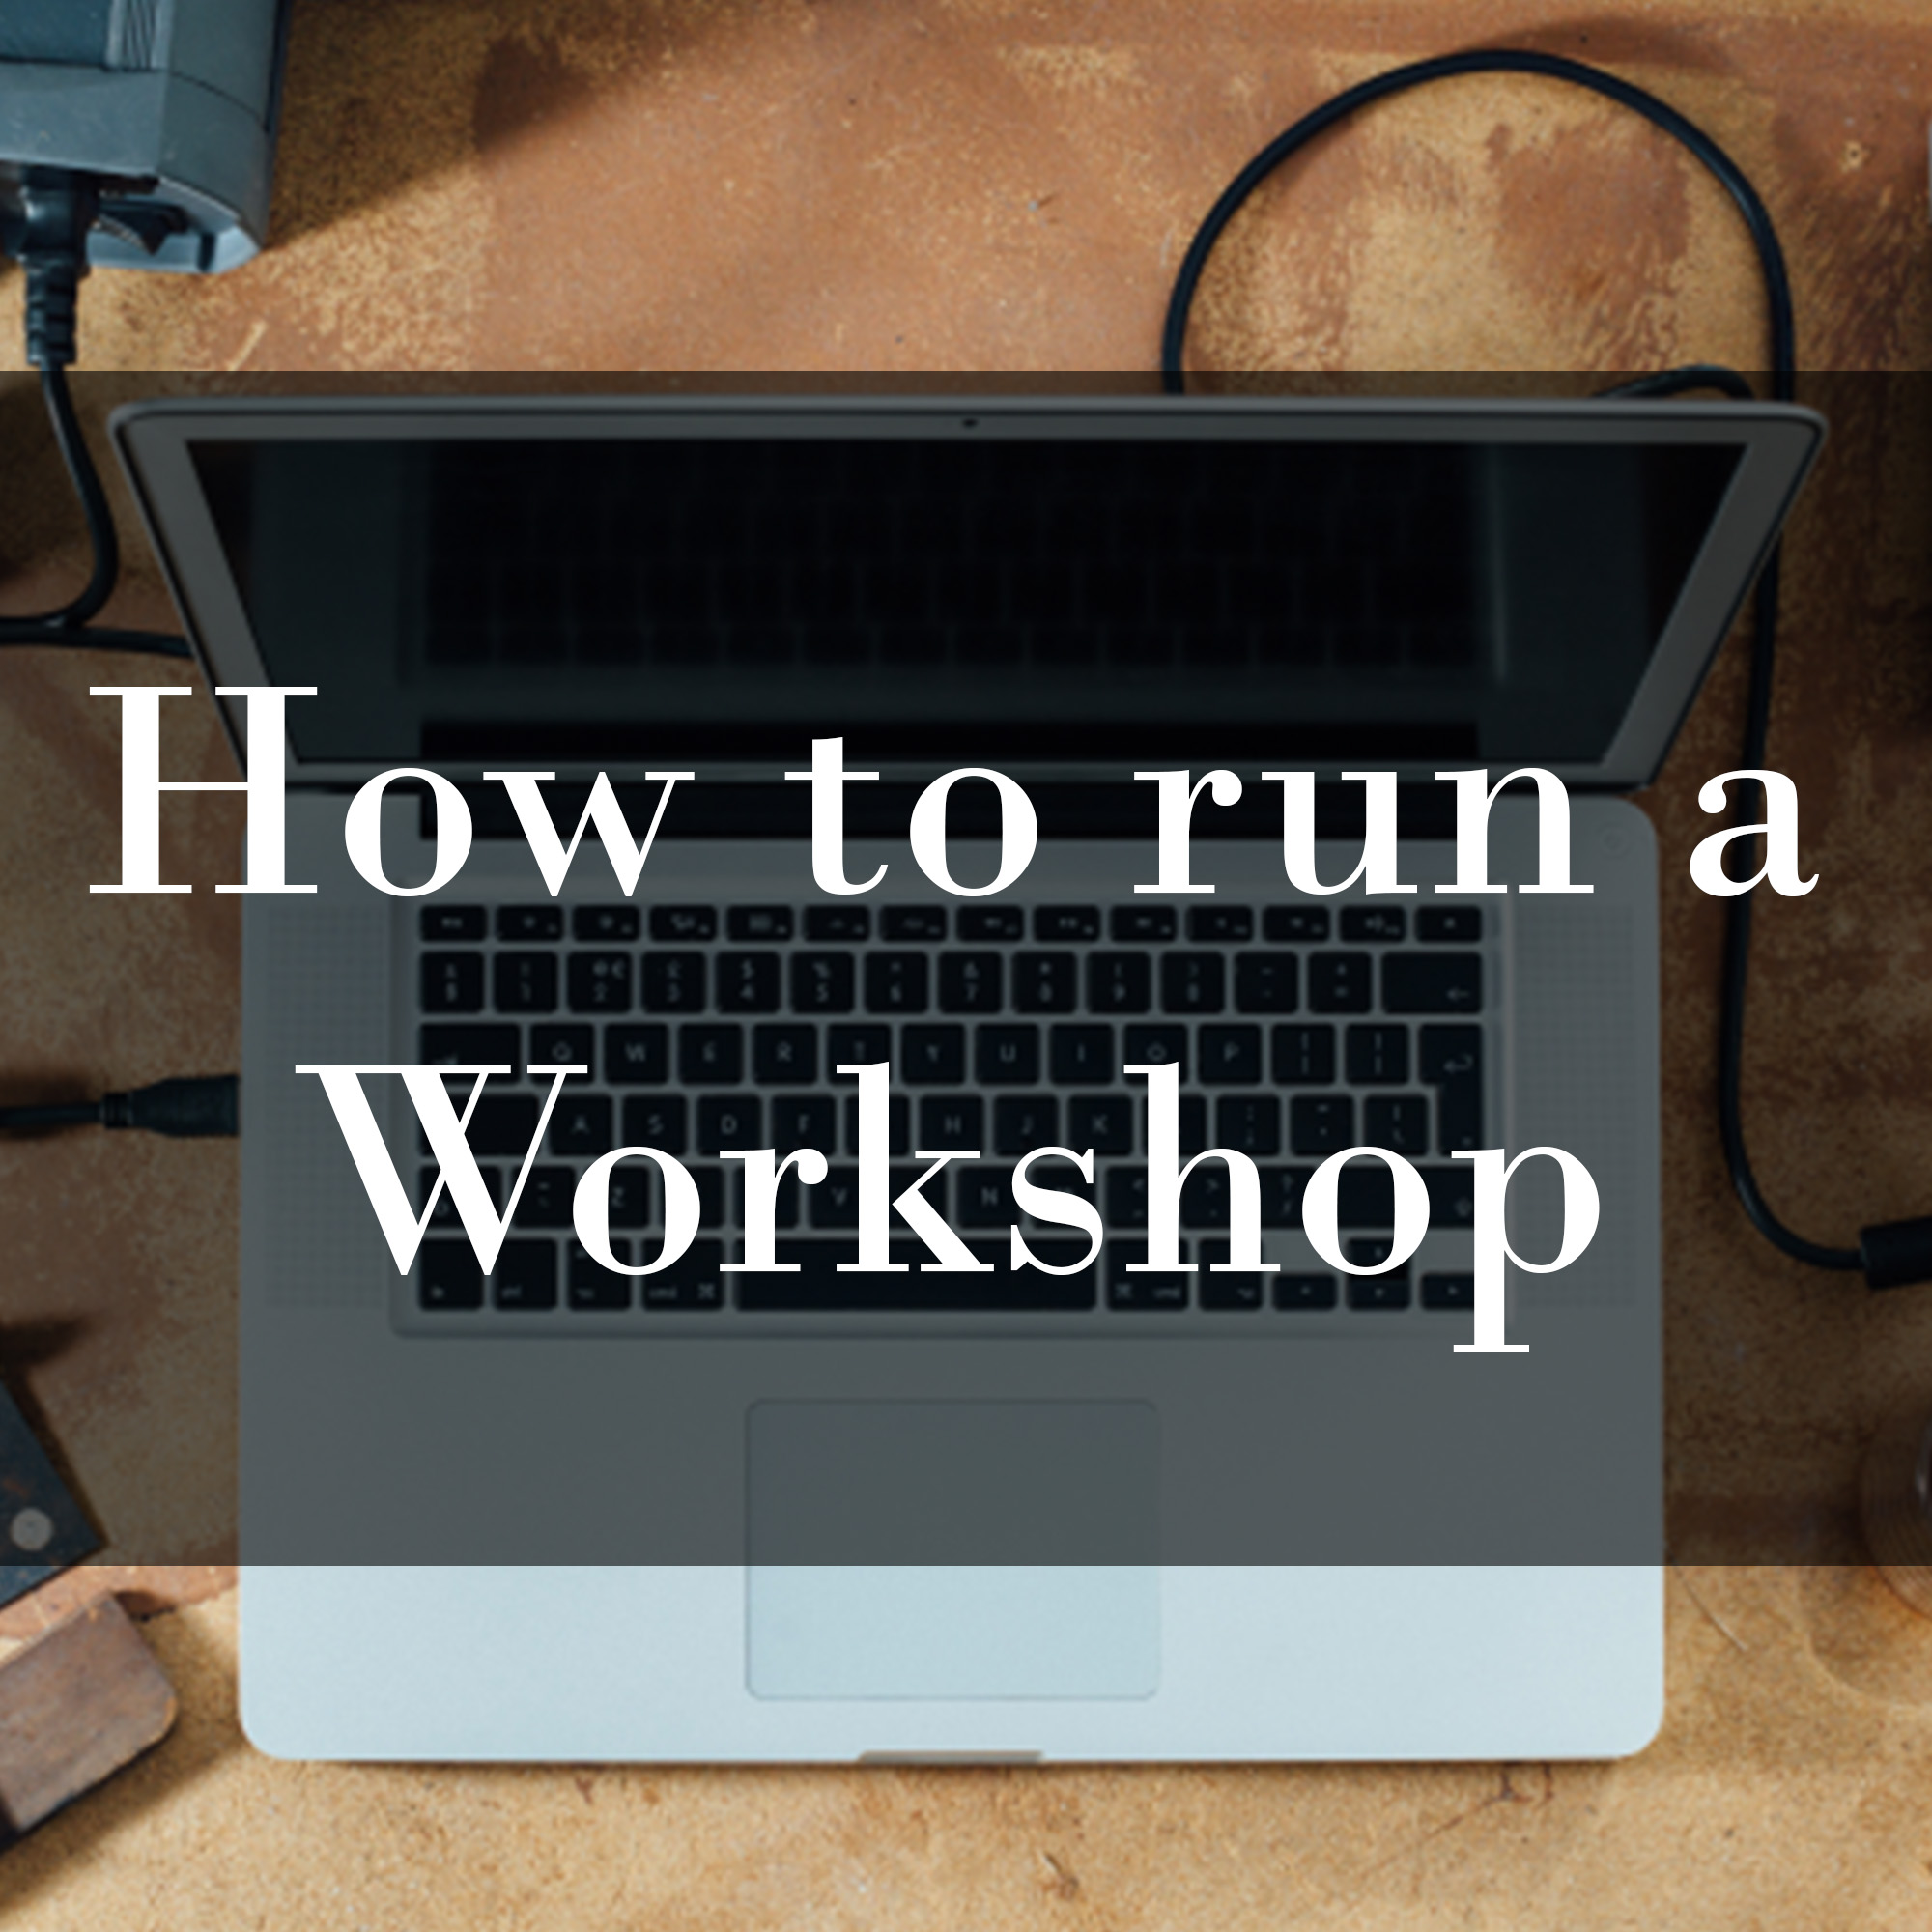 How to Run a Workshop